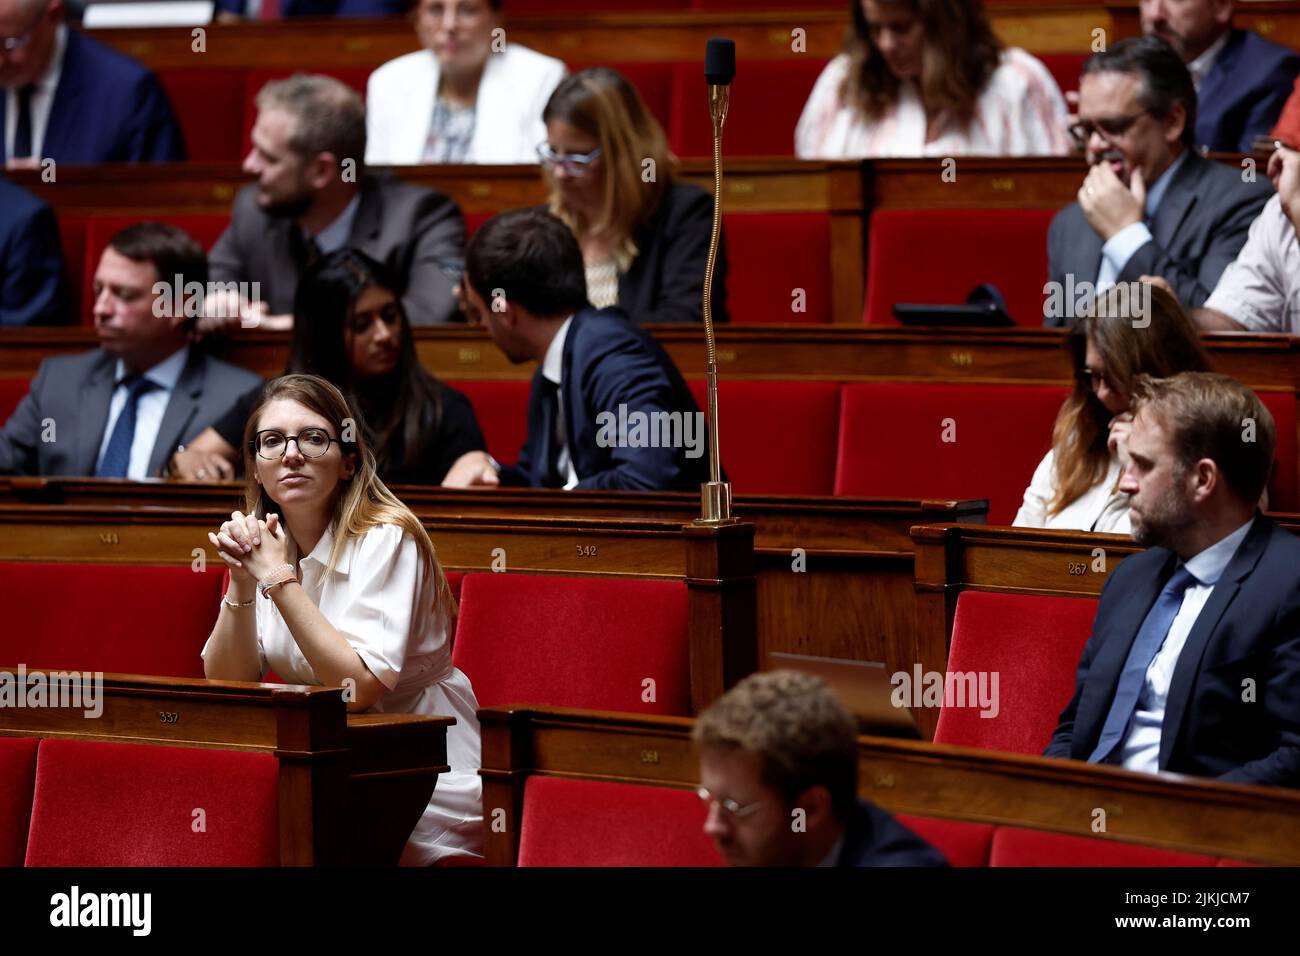 Aurore Berge, MP and President of the Renaissance ruling party (formerly LREM) parliamentary group, attends the questions to the government session at the National Assembly in Paris, France, August 2, 2022. REUTERS/Benoit Tessier Stock Photo